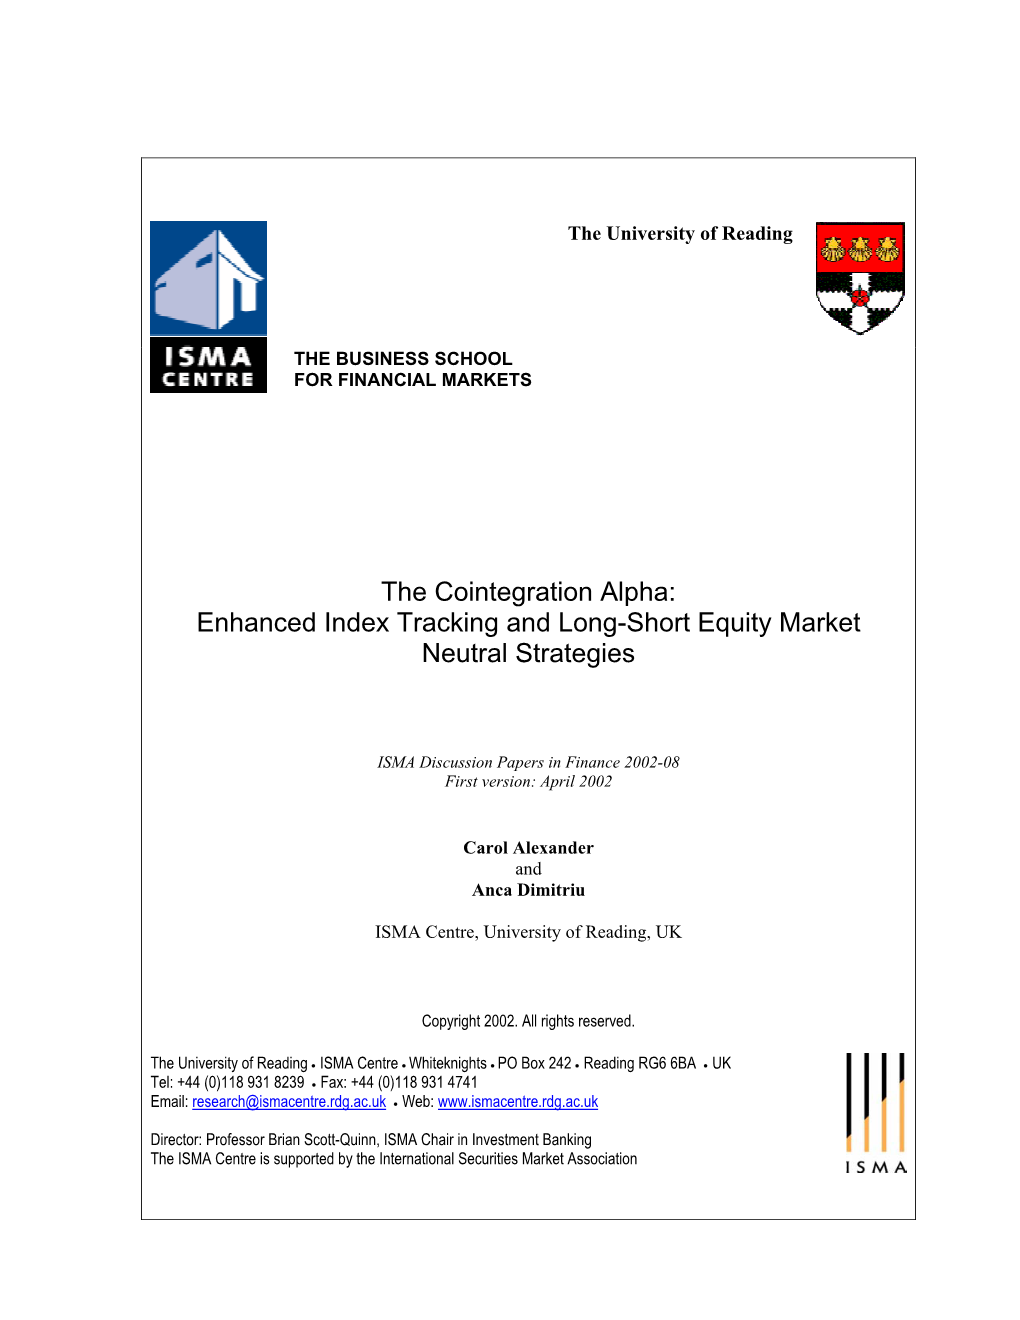 Alpha, Market Neutrality and Traditional Long-Short Equity Strategies